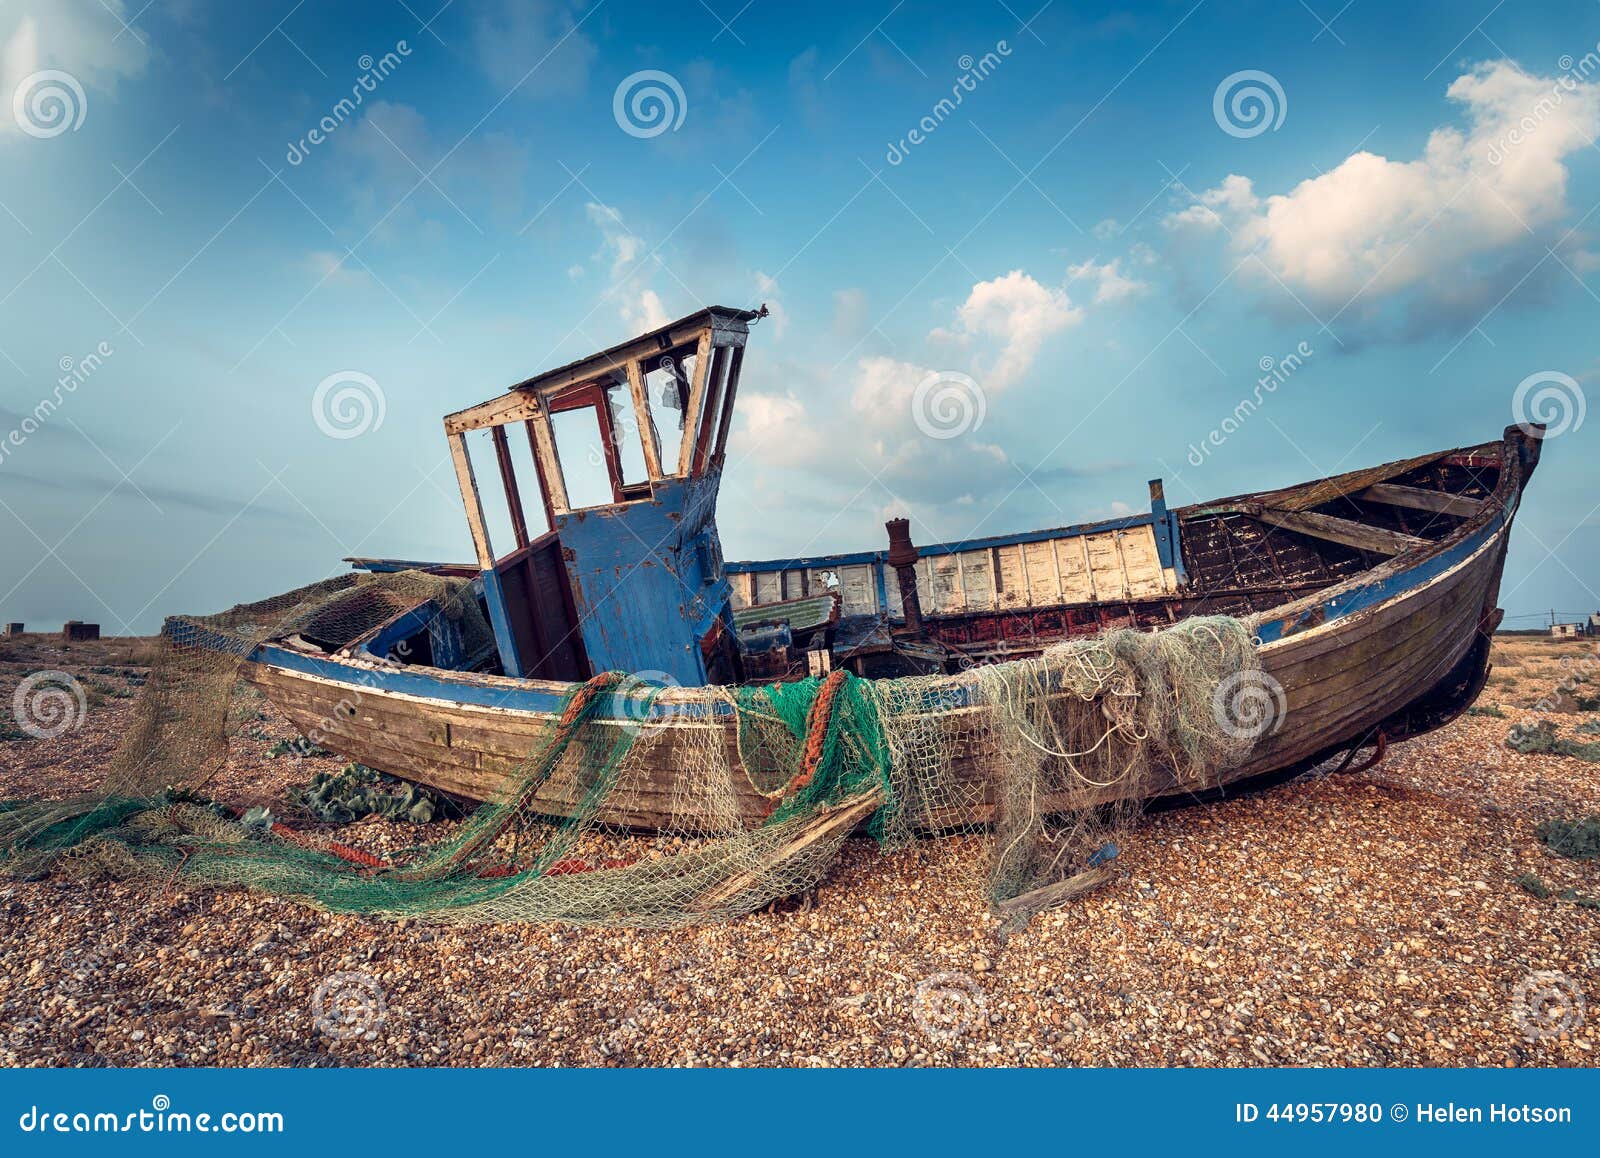 Old wooden fishing boat washed up on a shingle beach.